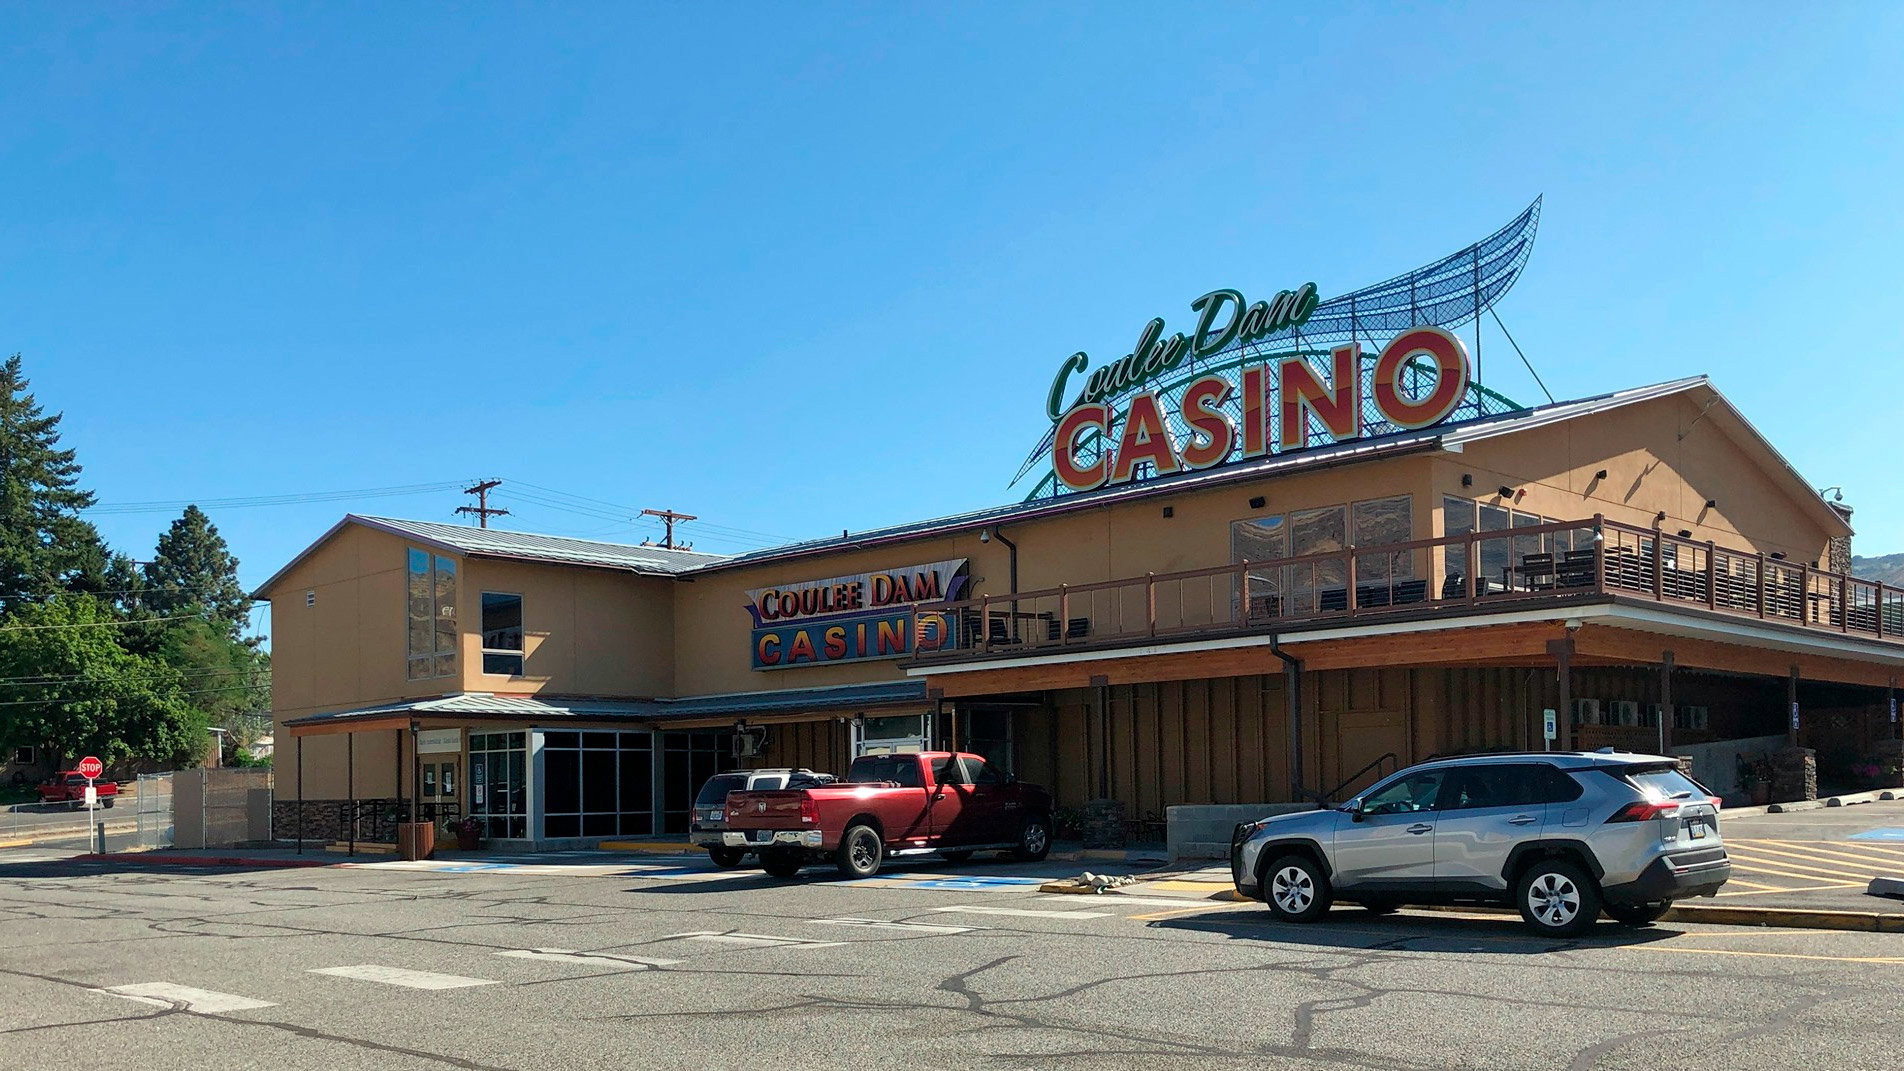  Washington: 12 Tribes Colville Casinos launch sports betting kiosks in three locations 